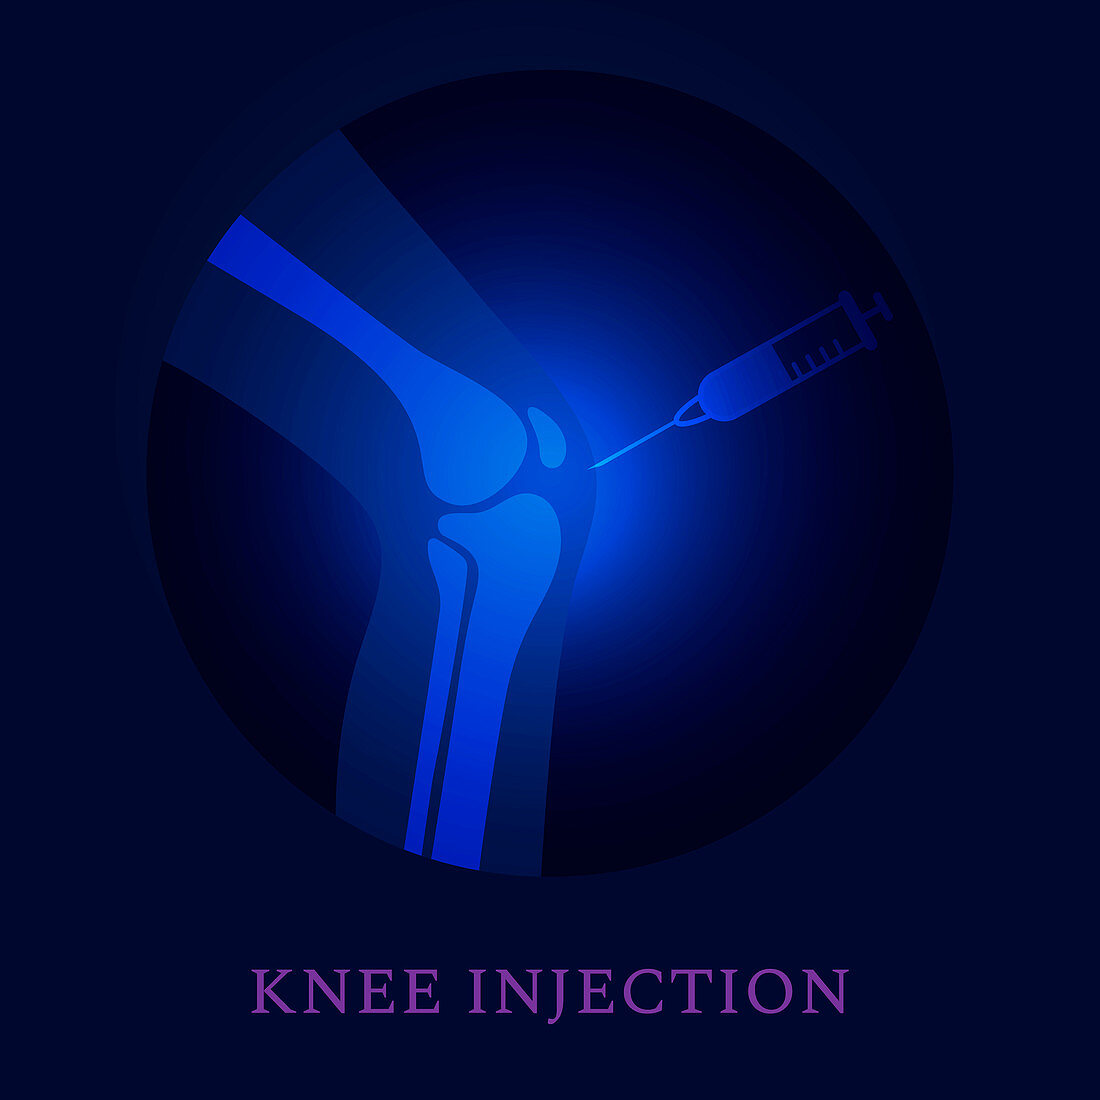 Knee injection, conceptual illustration